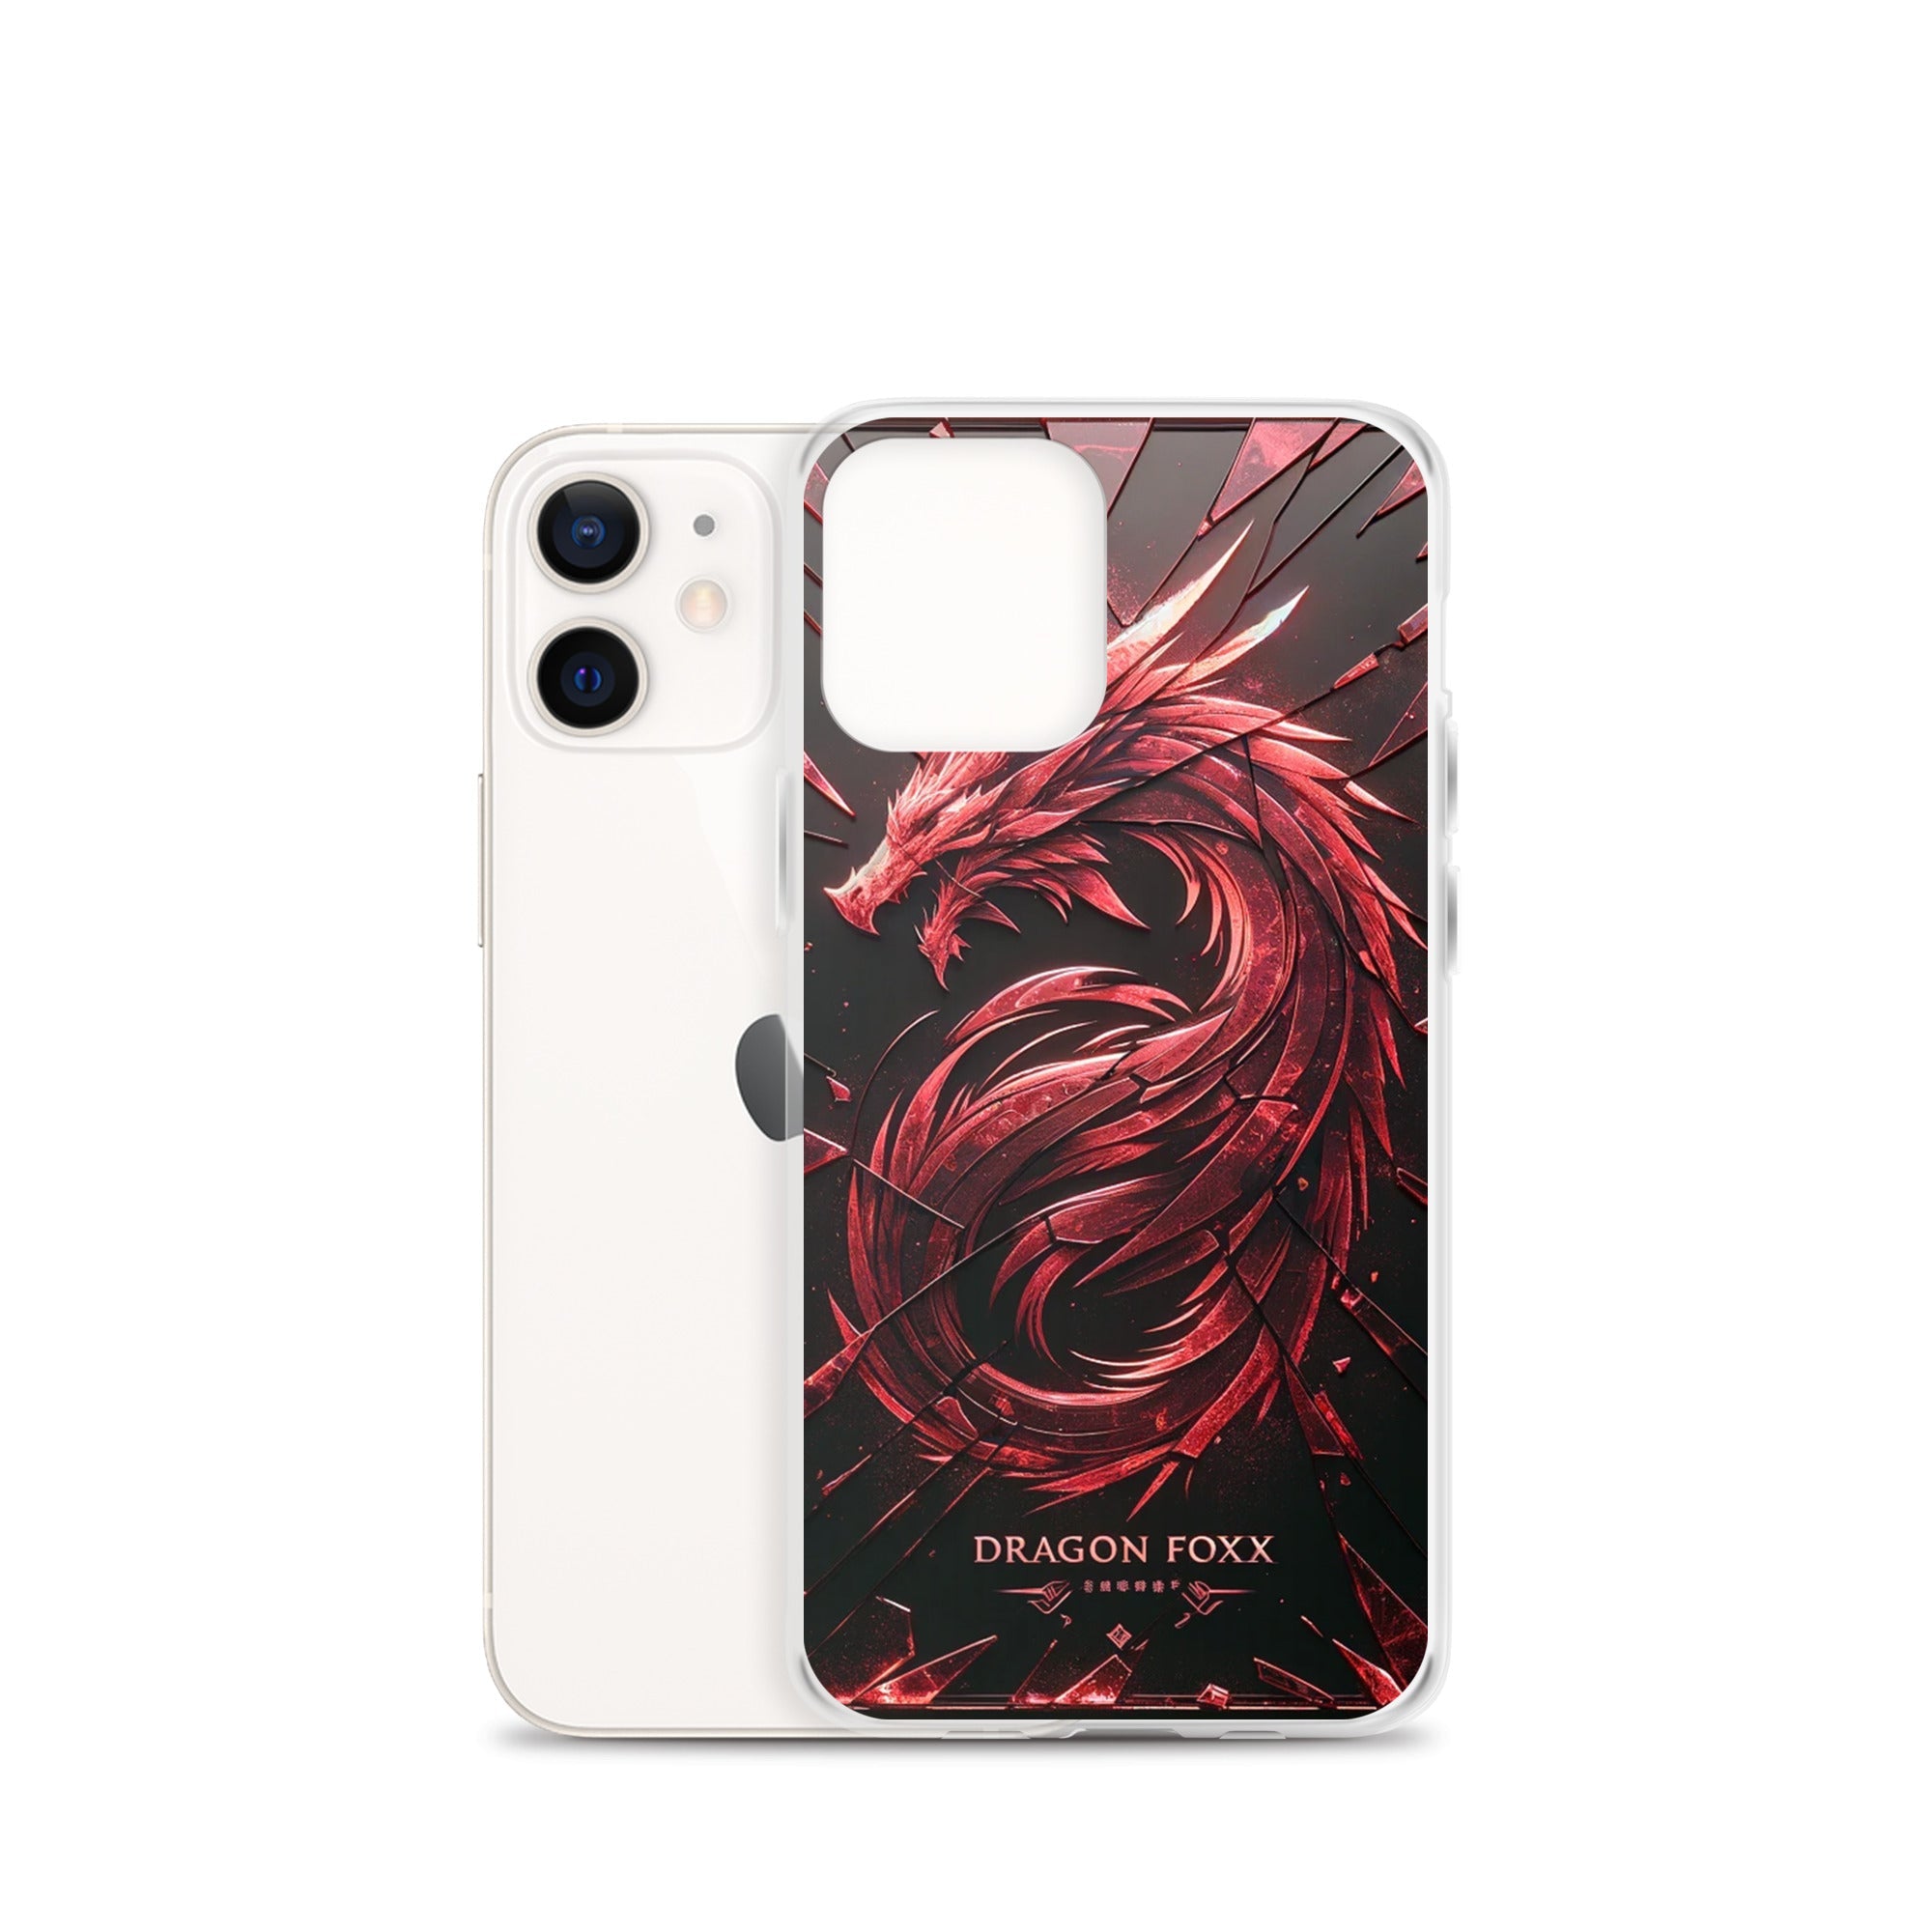 DRAGON FOXX™ Red Dragon Phone Case for iPhone® - Phone Case for iPhone® - DRAGON FOXX™ - DRAGON FOXX™ Red Dragon Phone Case for iPhone® - 7805351_11703 - iPhone 12 mini - Red/Black/Clear - Accessories - Dragon Foxx™ - DRAGON FOXX™ Phone Case for iPhone®